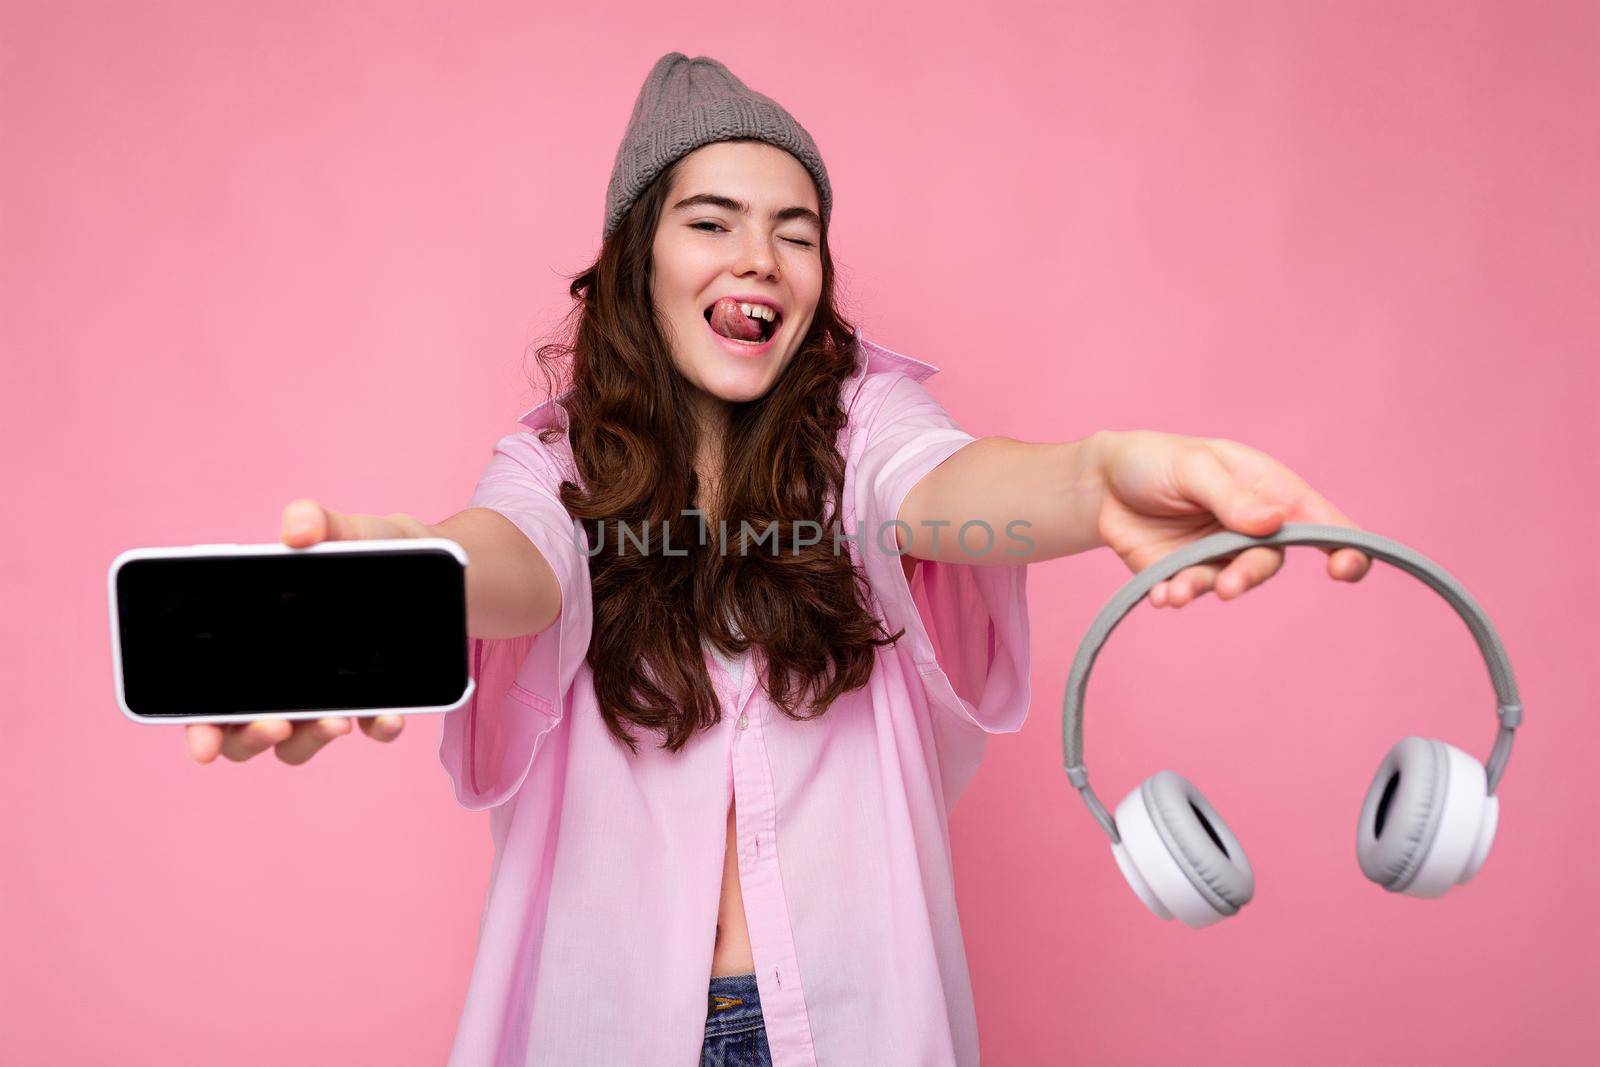 Photo of beautiful positive smiling young woman wearing stylish casual outfit isolated on colorful background wall holding white bluetooth wireless earphones and showing mobile phone with empty screen for mockup looking at camera.